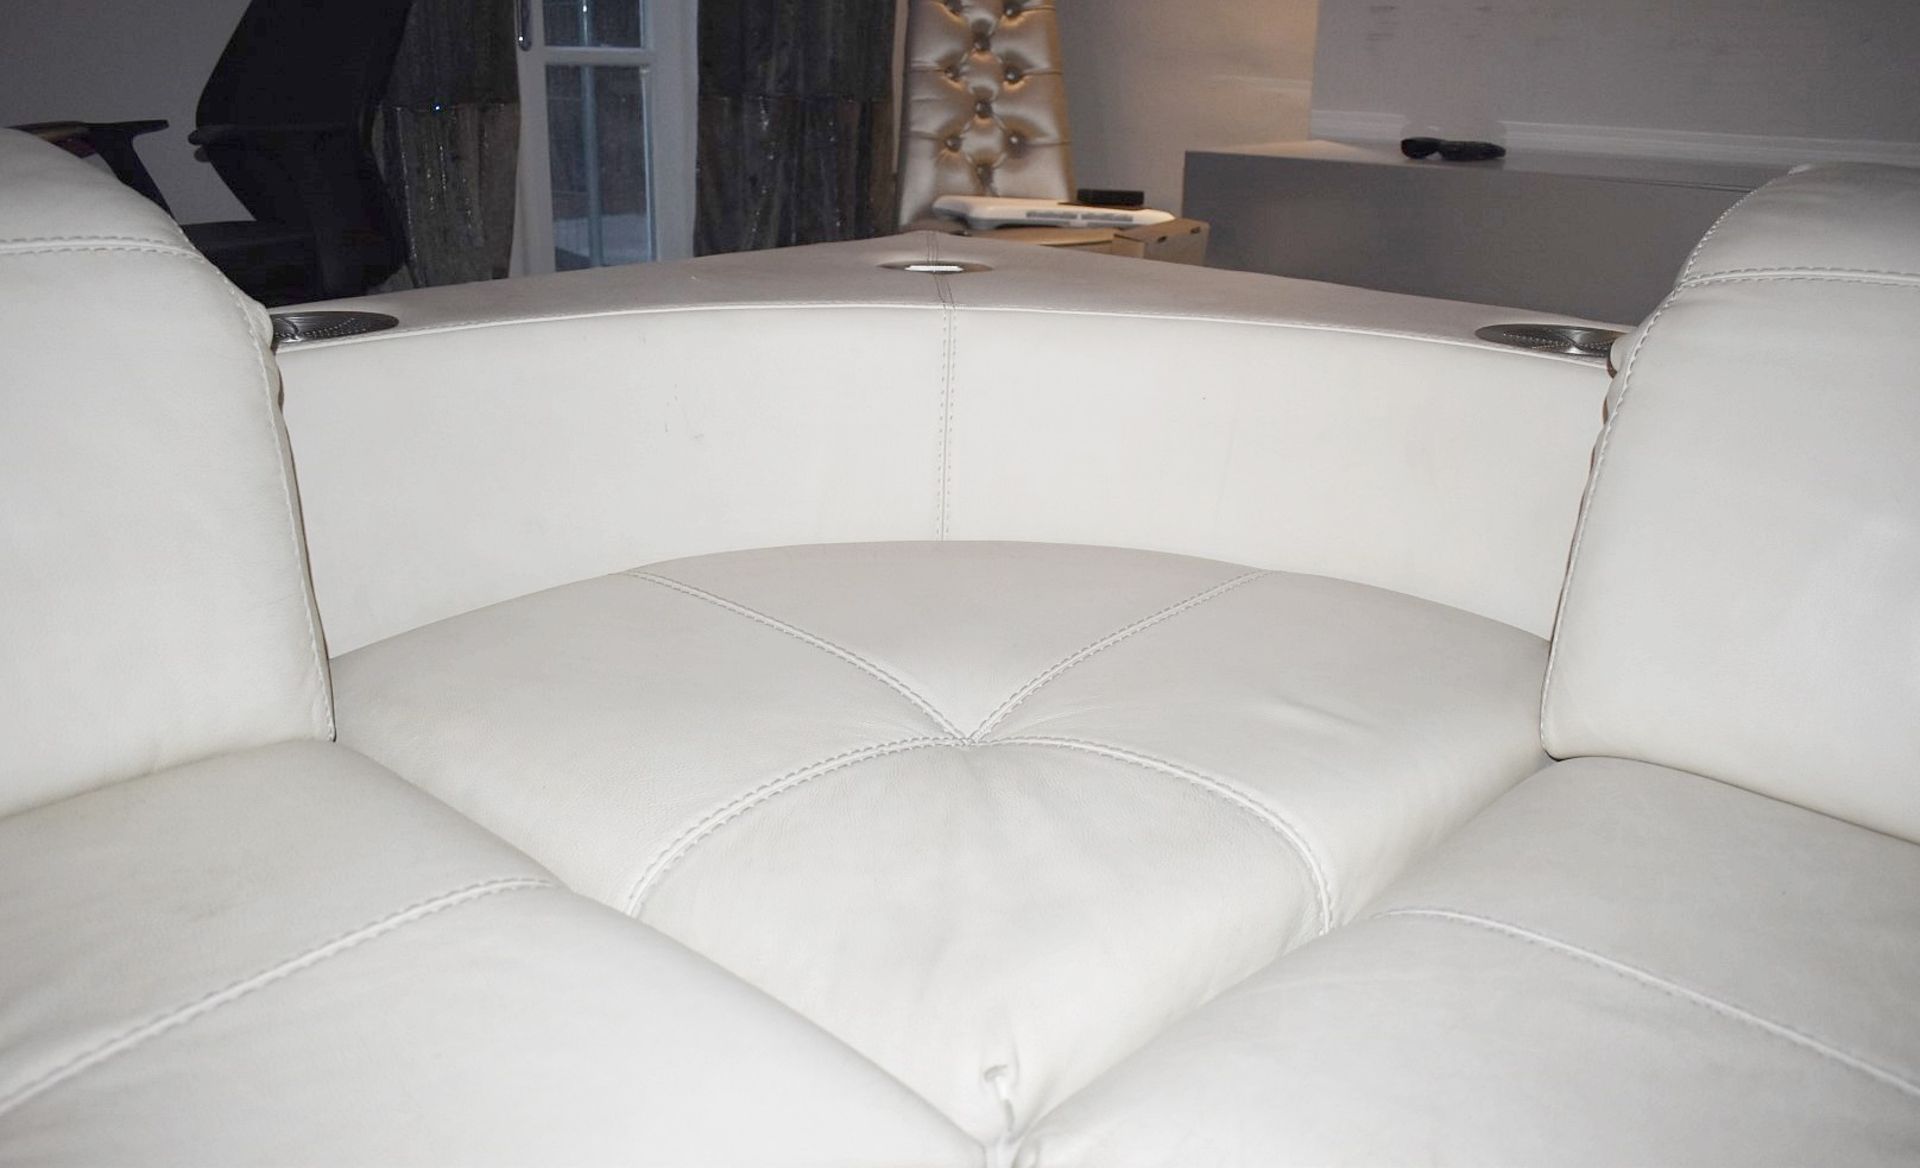 1 x NATUZZI Luxury White Leather Corner Sofa With Integrated Stereo Speakers And iPhone Dock - Cream - Image 6 of 13